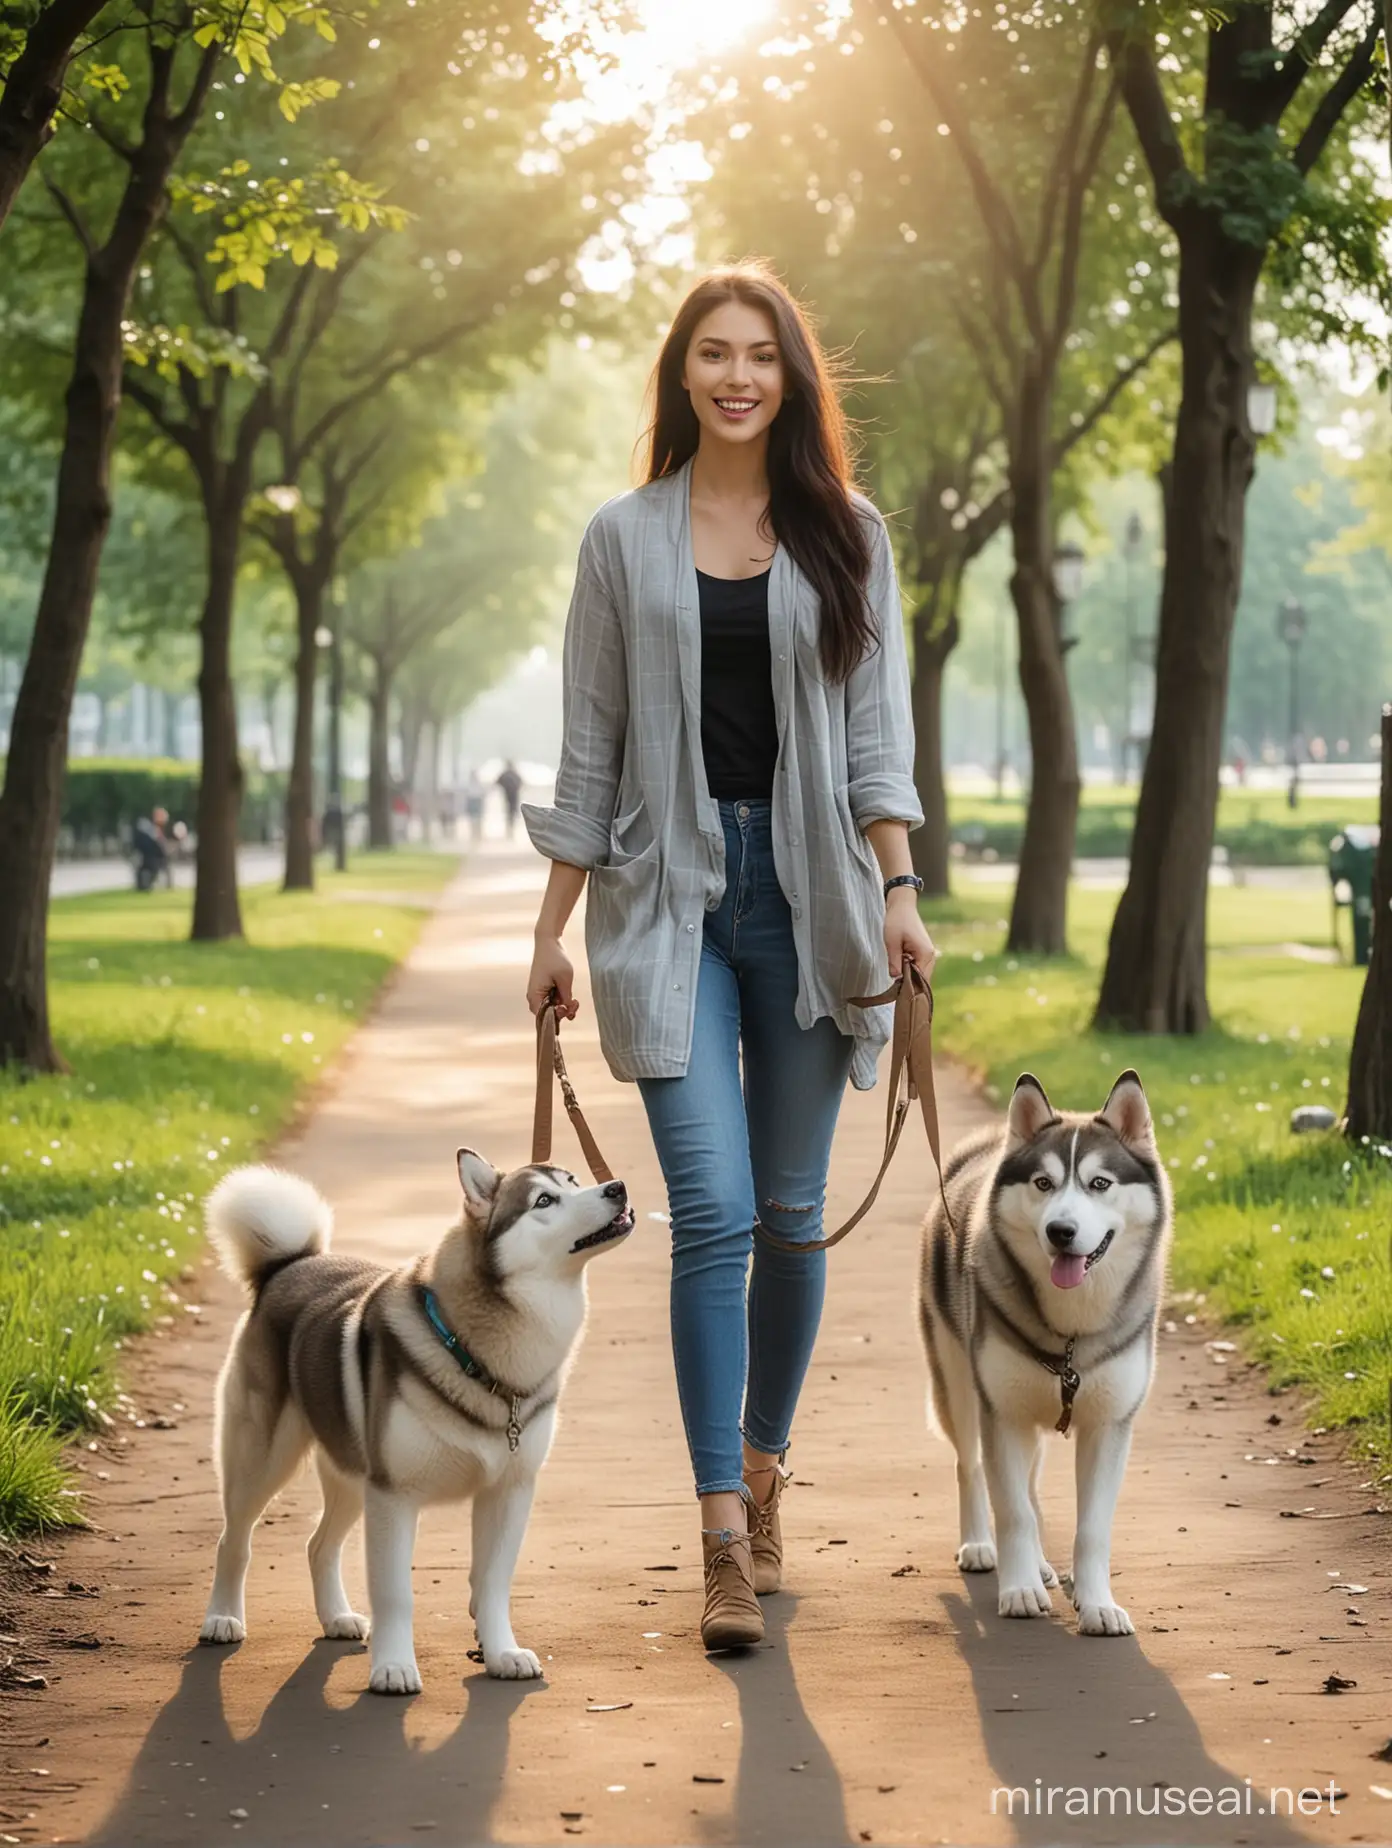 Very beautiful woman enjoy walking with cute husky in the green park, in the morning time, 4k photo